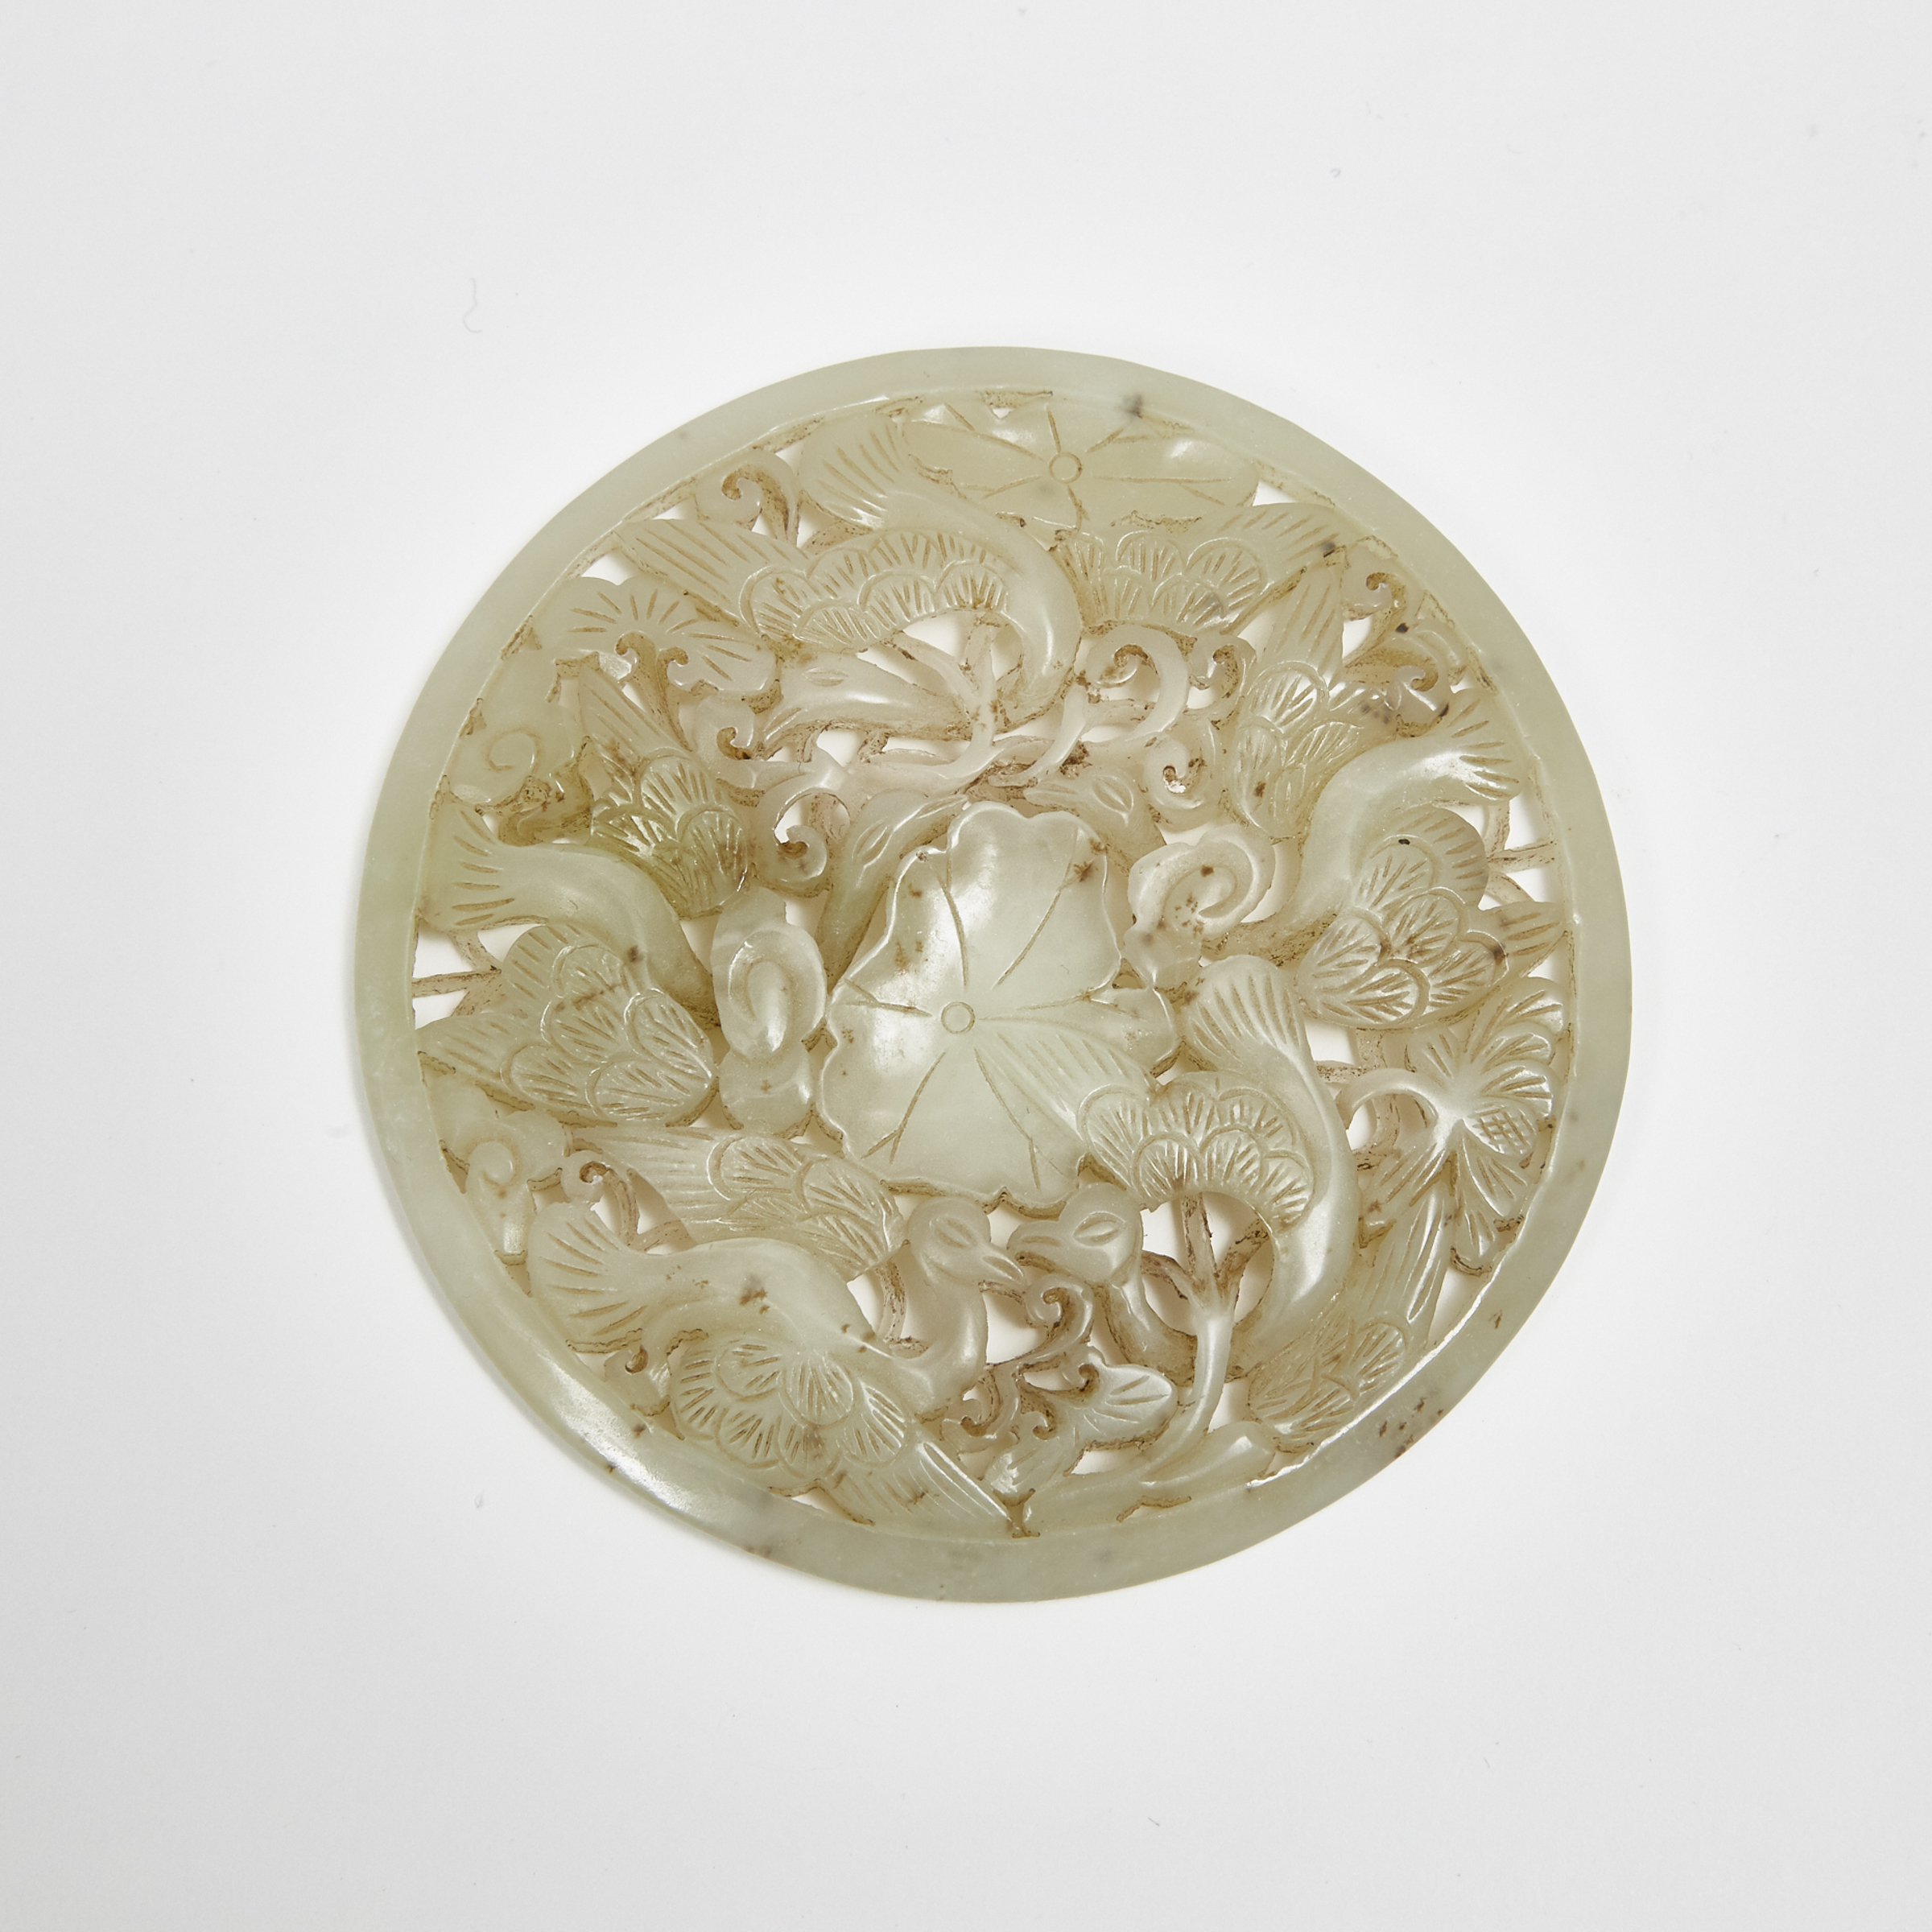 A Reticulated Celadon Jade Roundel with Cranes